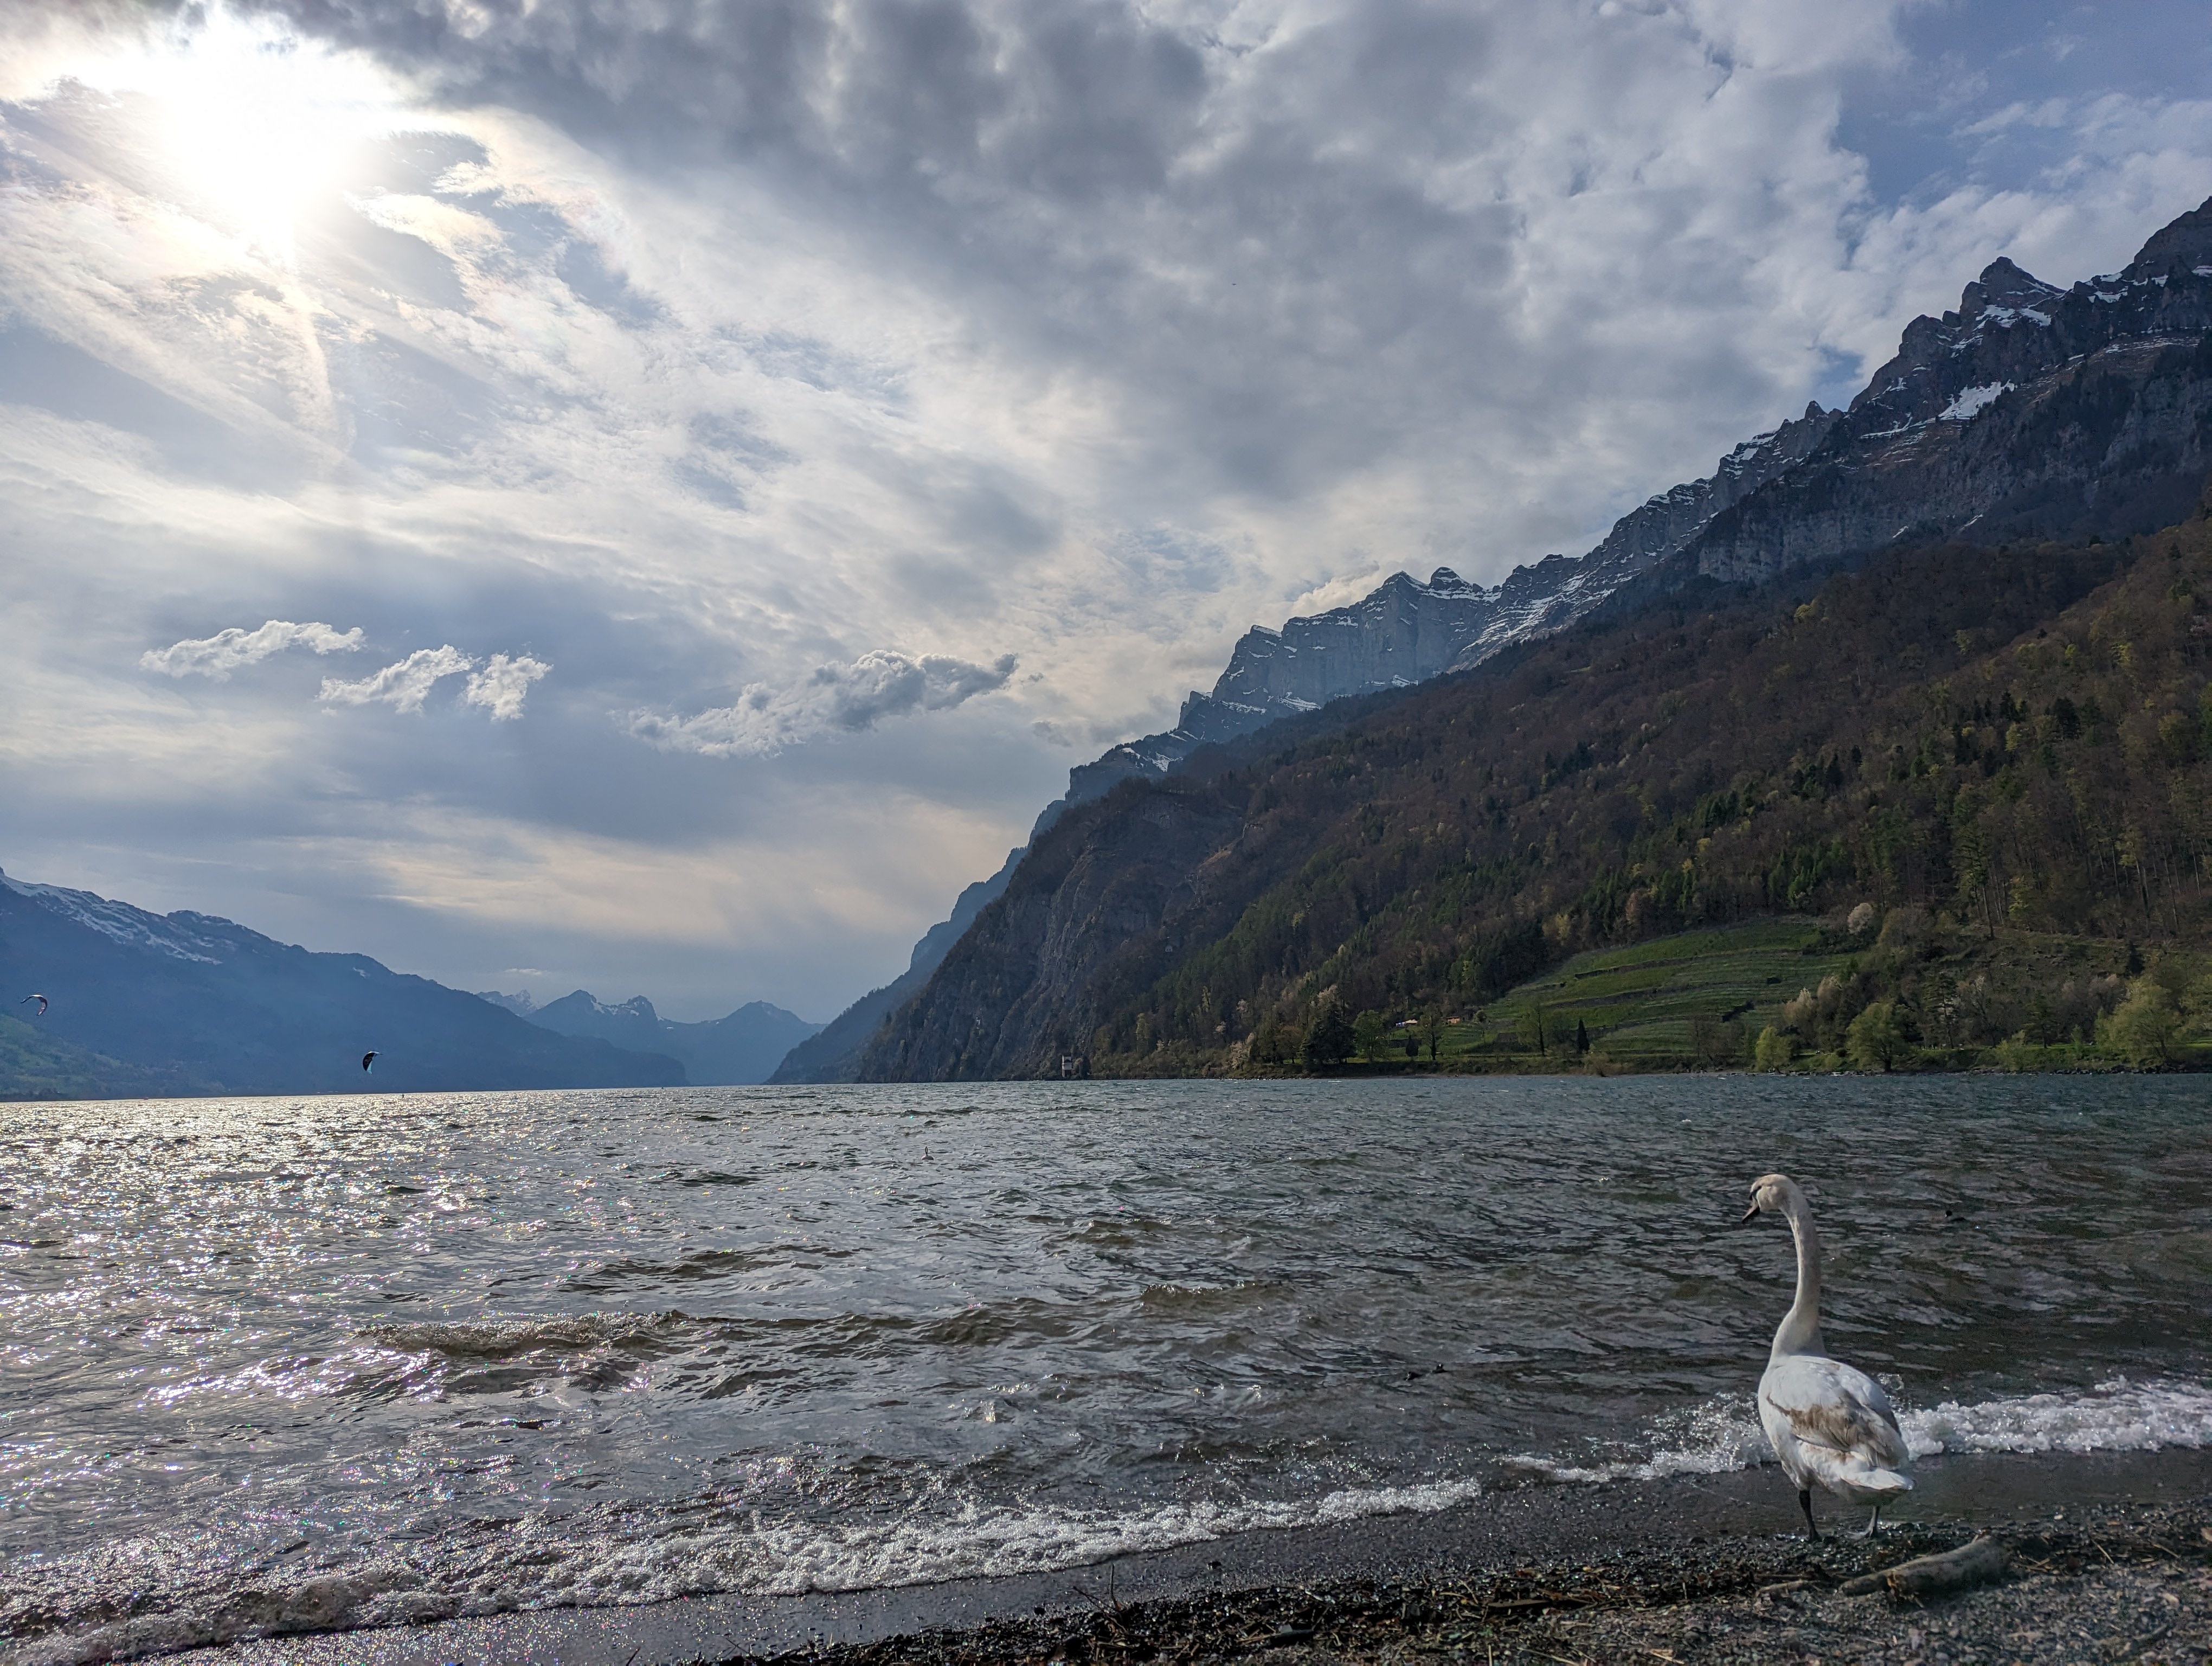 Swan at edge of lake, mountains towering to the right